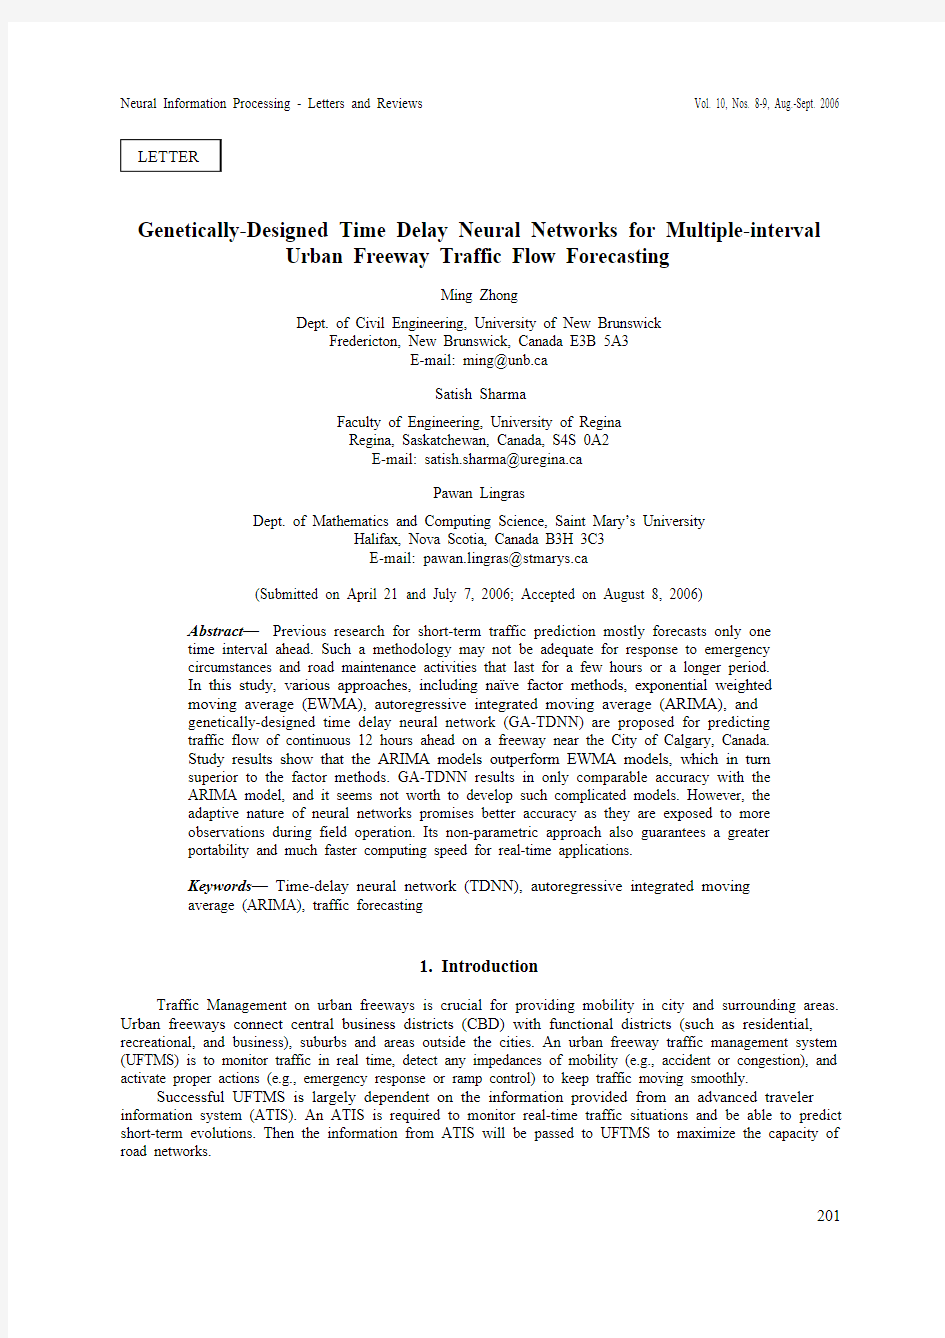 LETTER Genetically-Designed Time Delay Neural Networks for Multiple-interval Urban Freeway